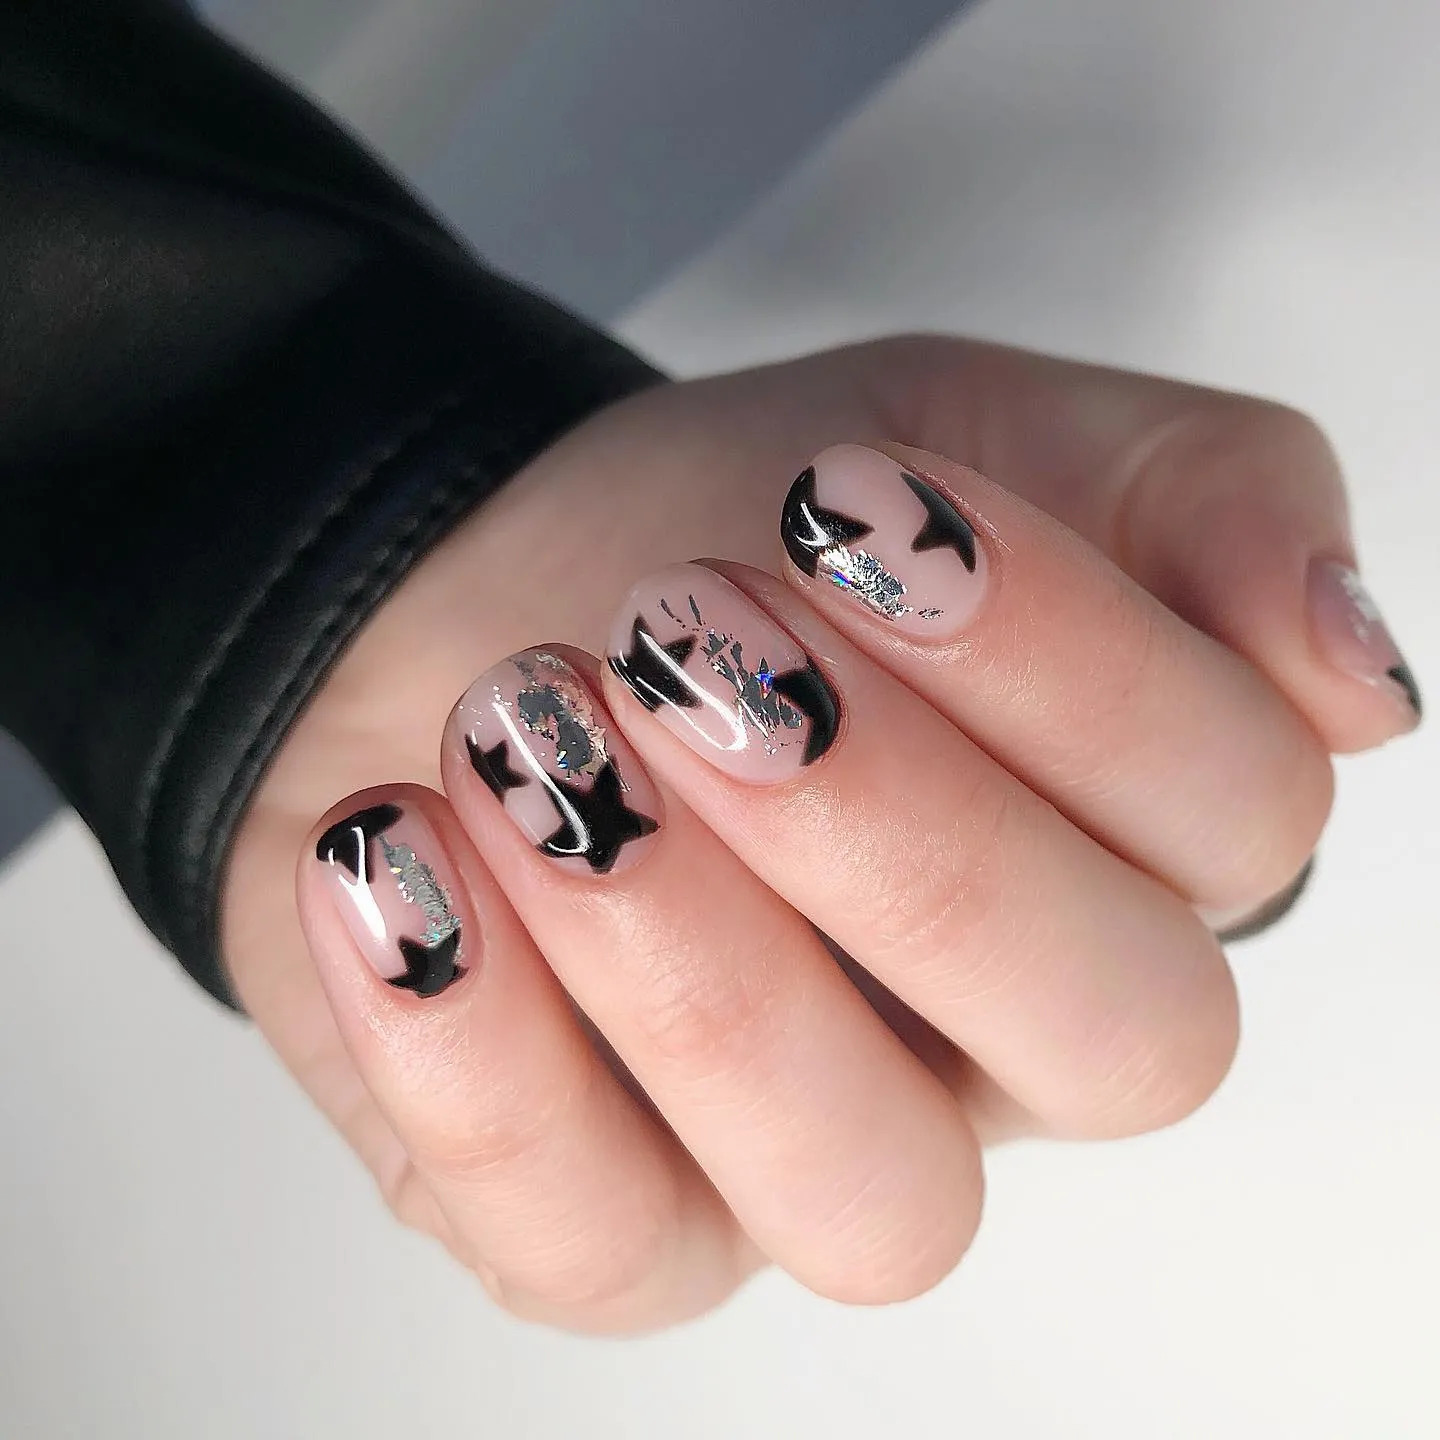 Black Star New Year's Eve Nails